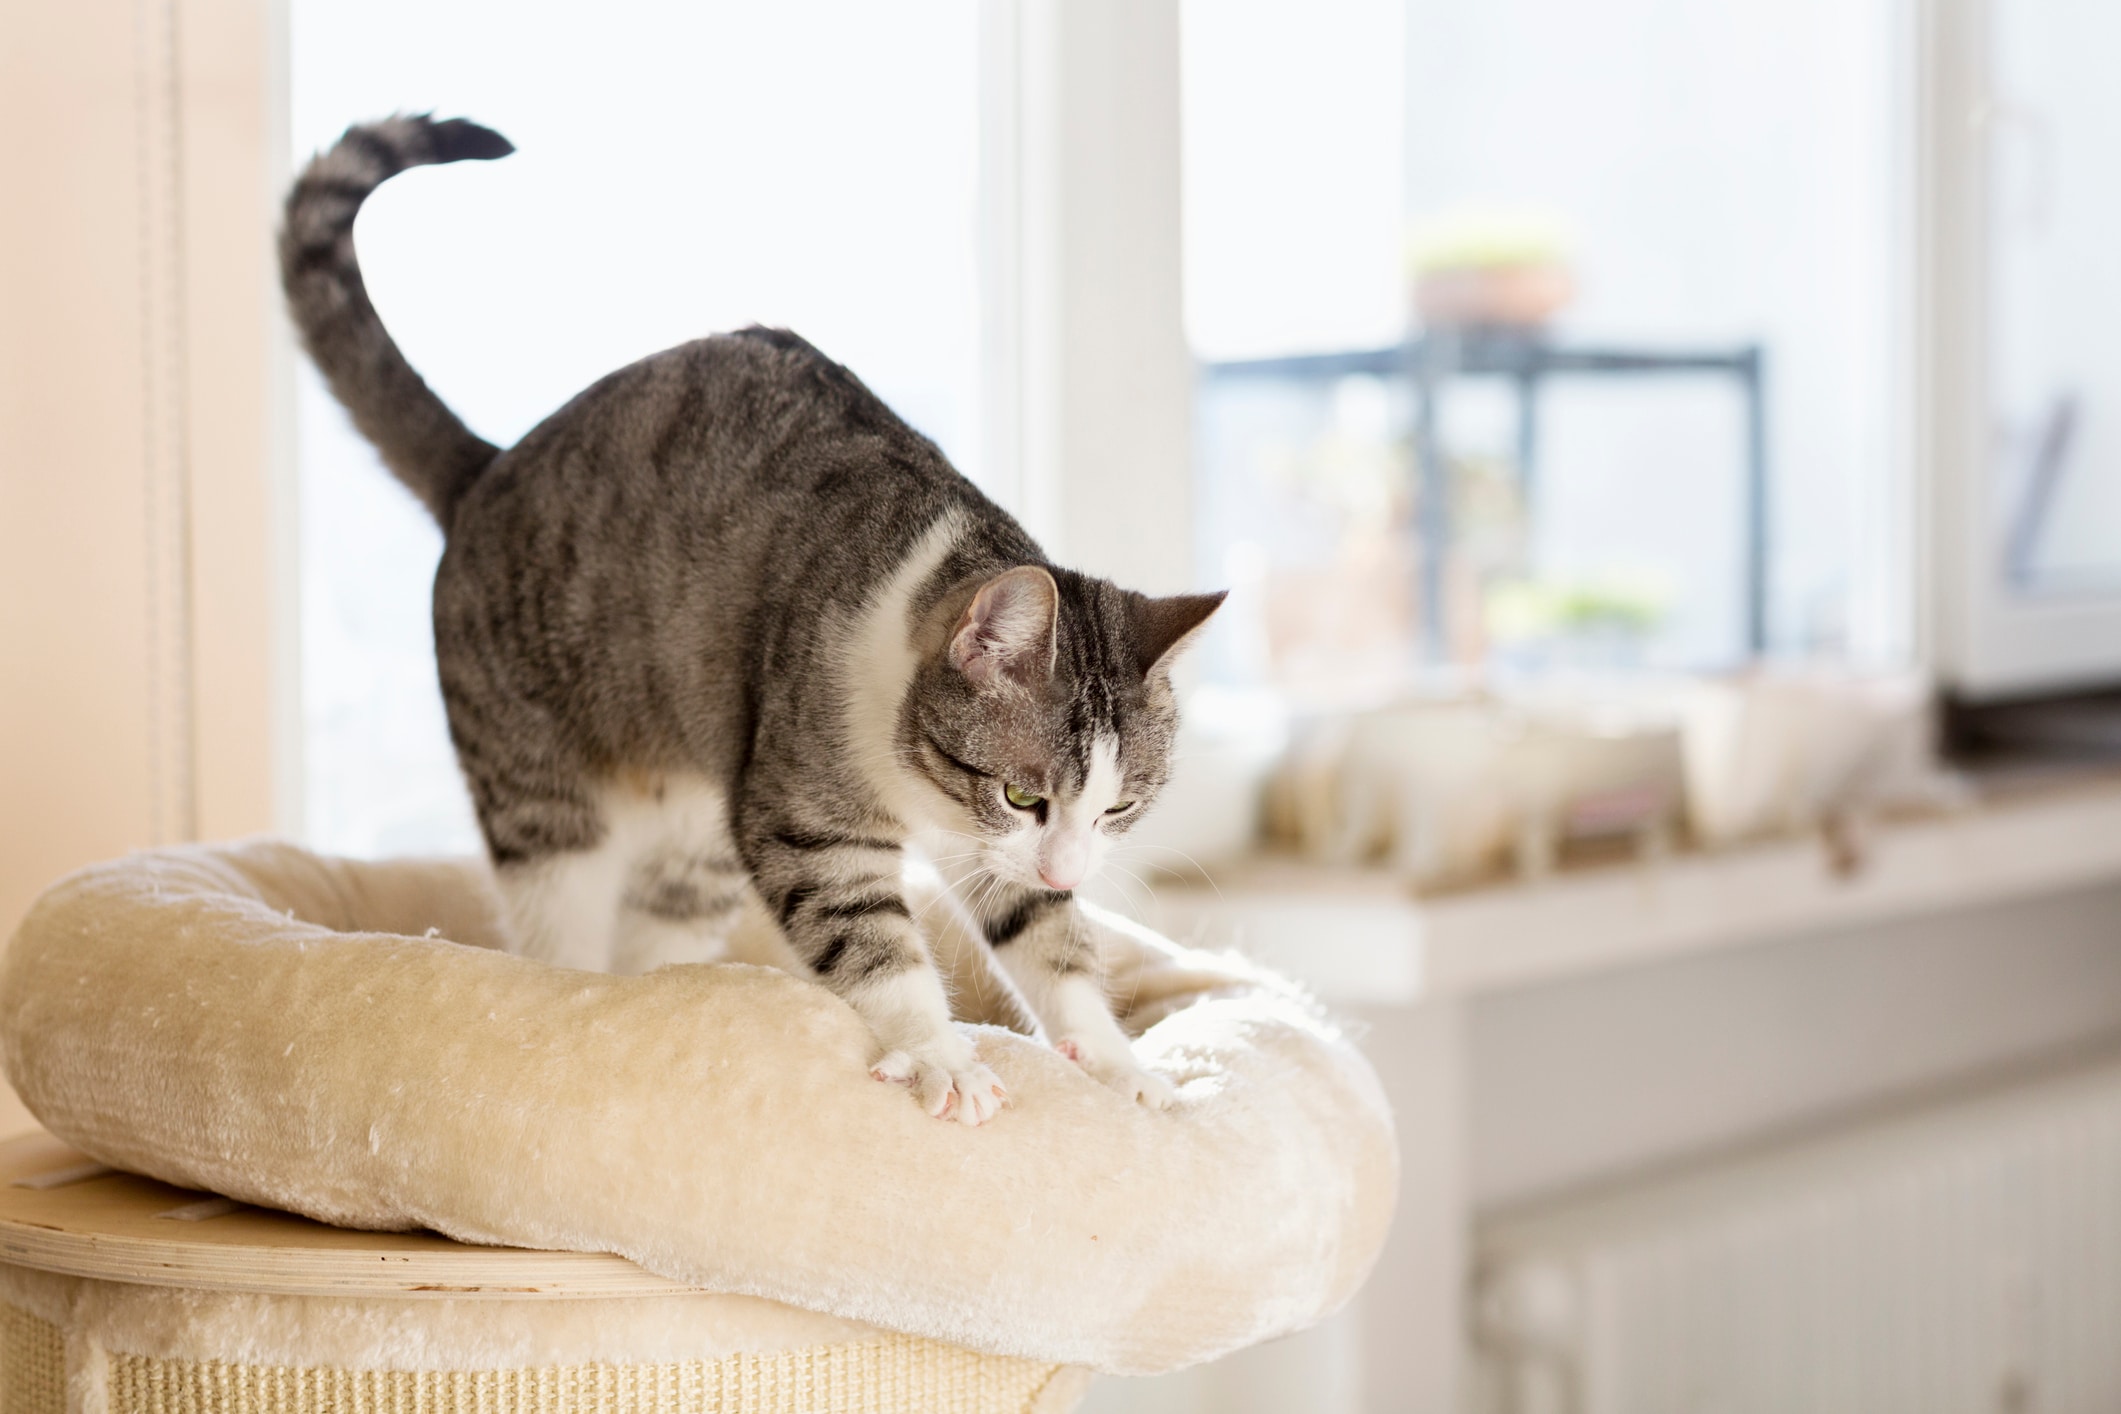 Why do cats knead? Decode the secret language of your cat’s biscuits